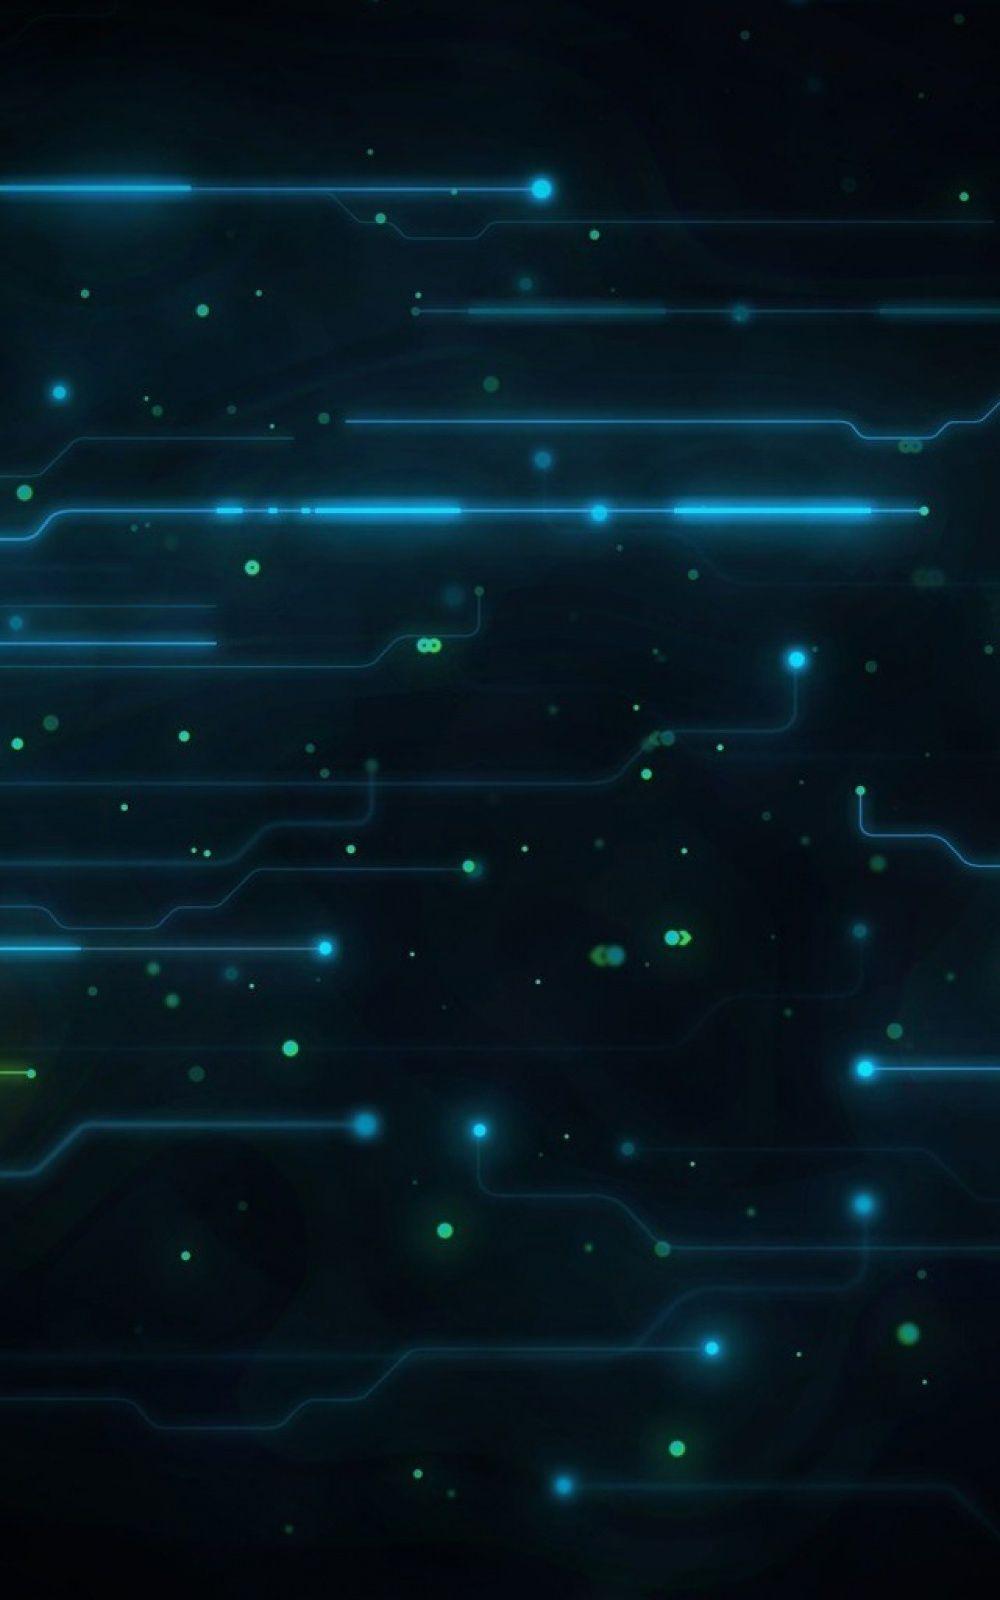 Abstract Tron Legacy Android Wallpaper free download